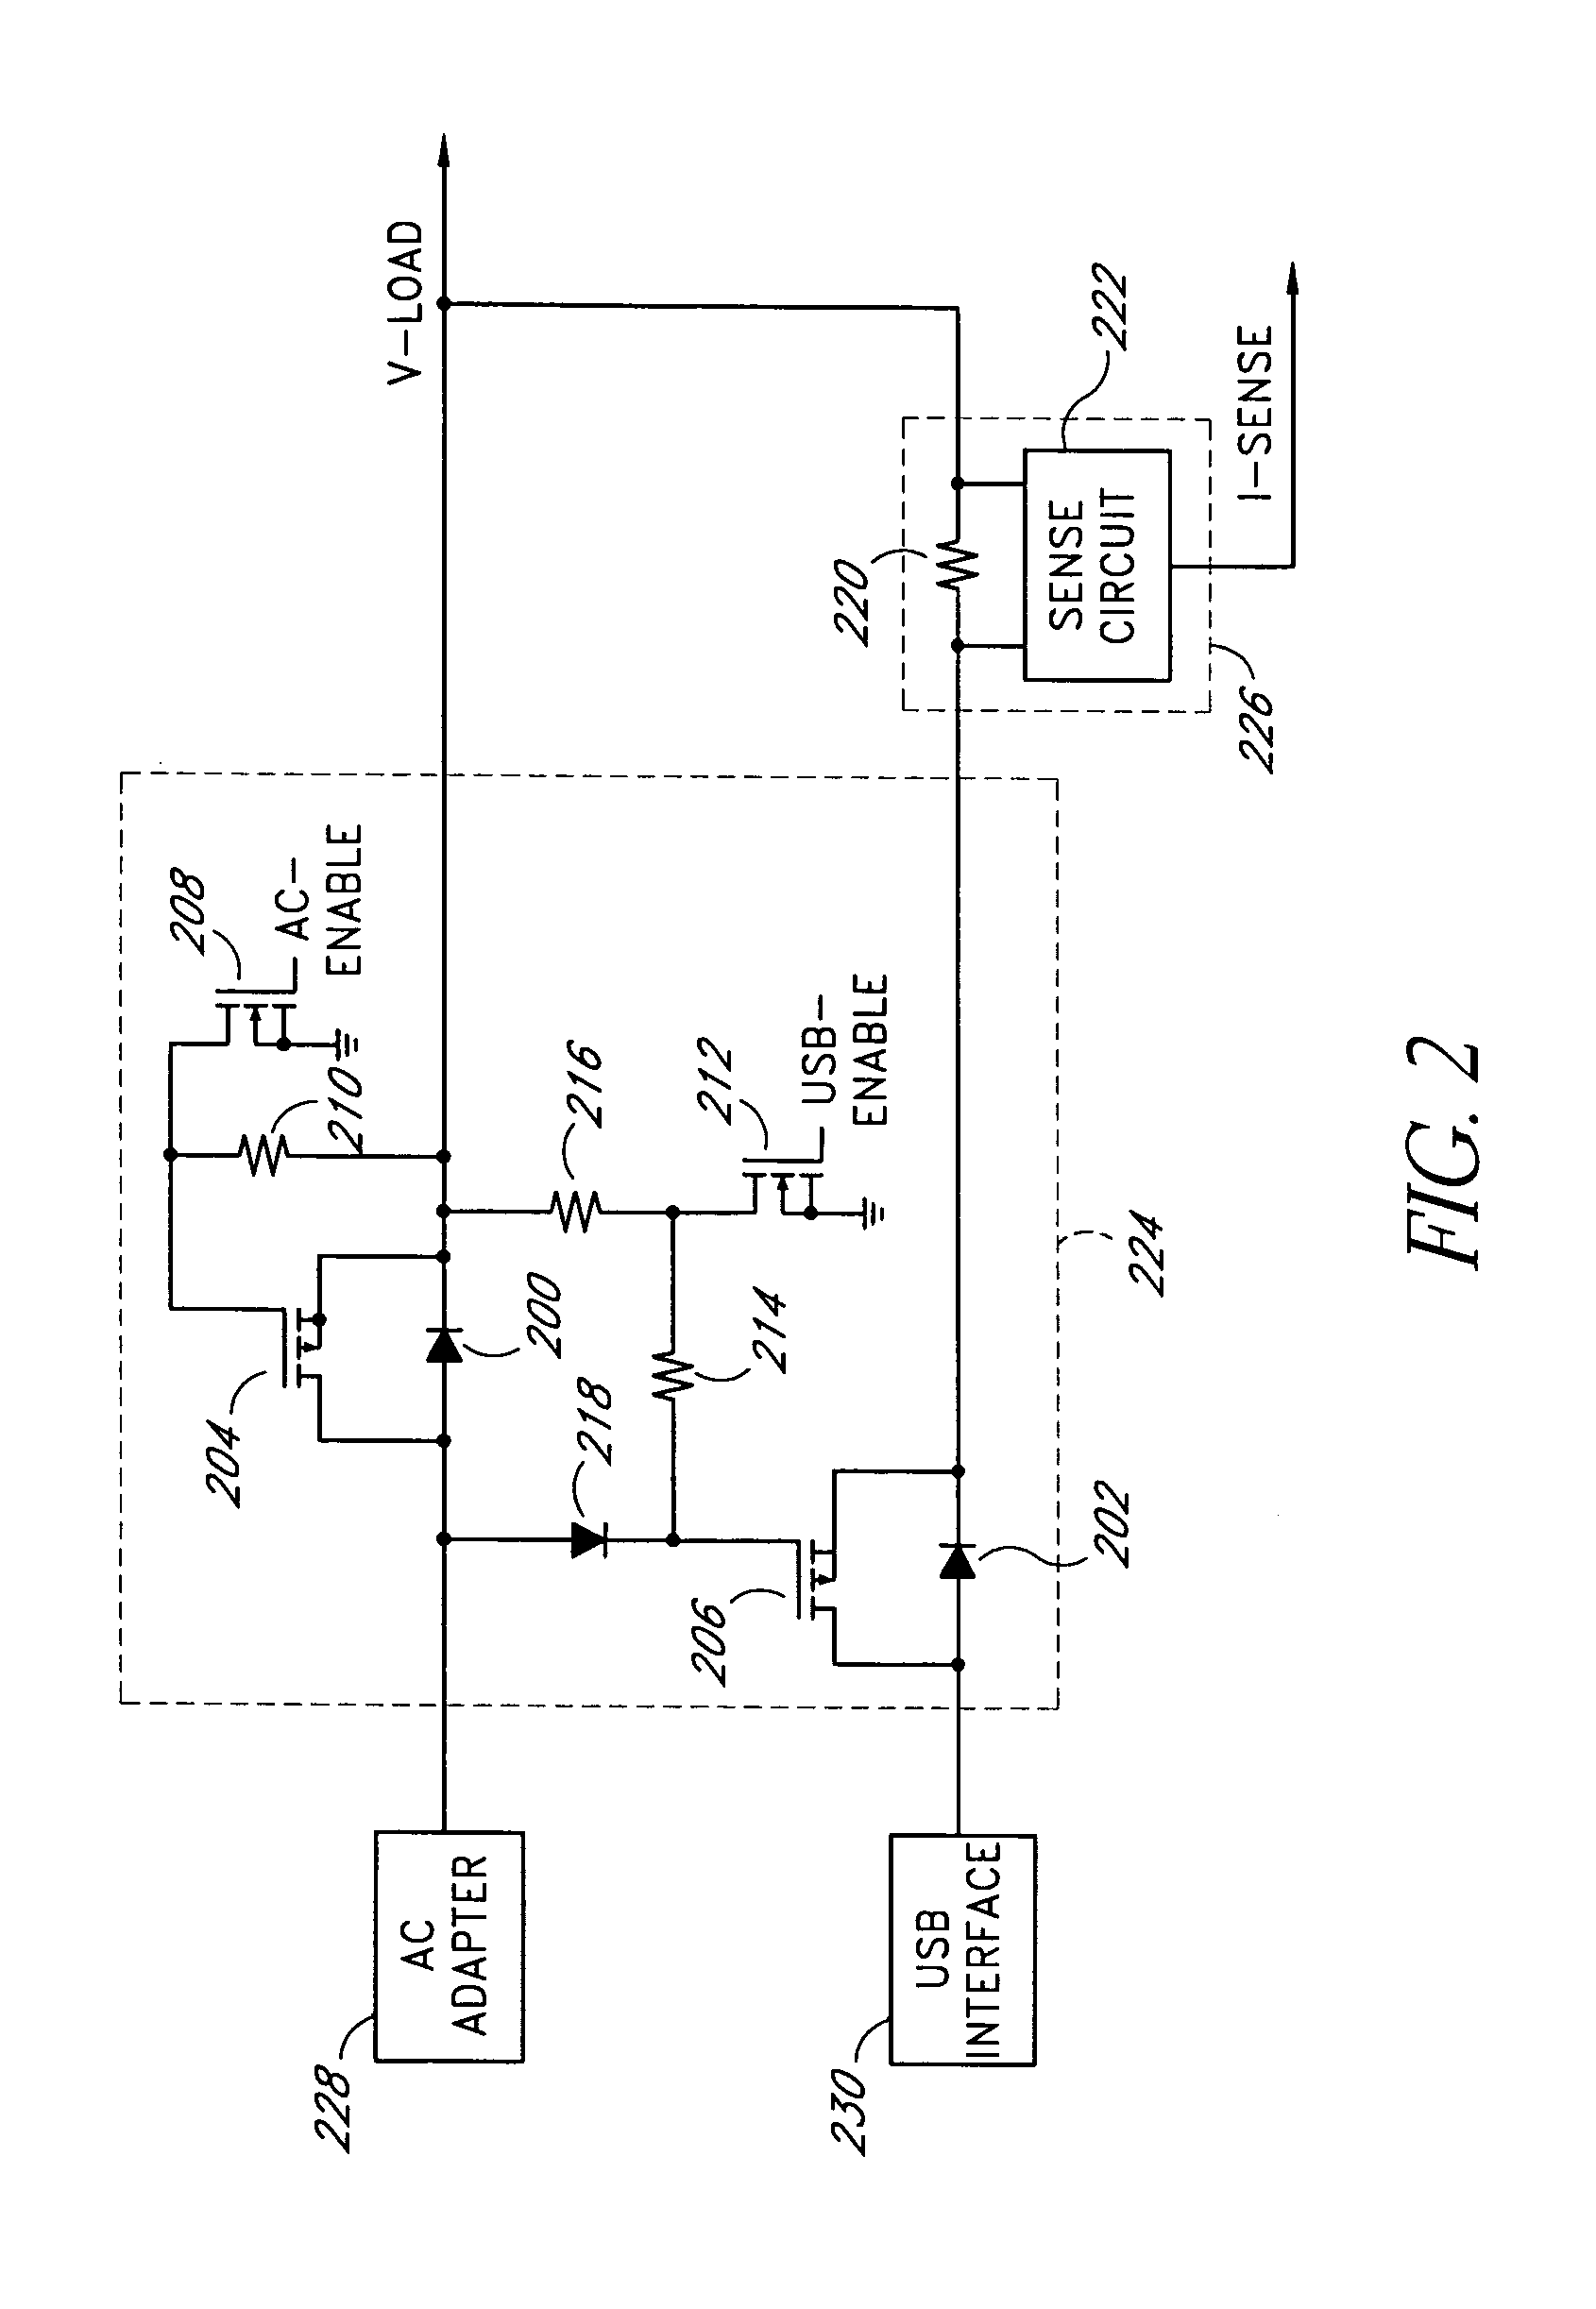 Battery charging and discharging by using a bi-directional transistor